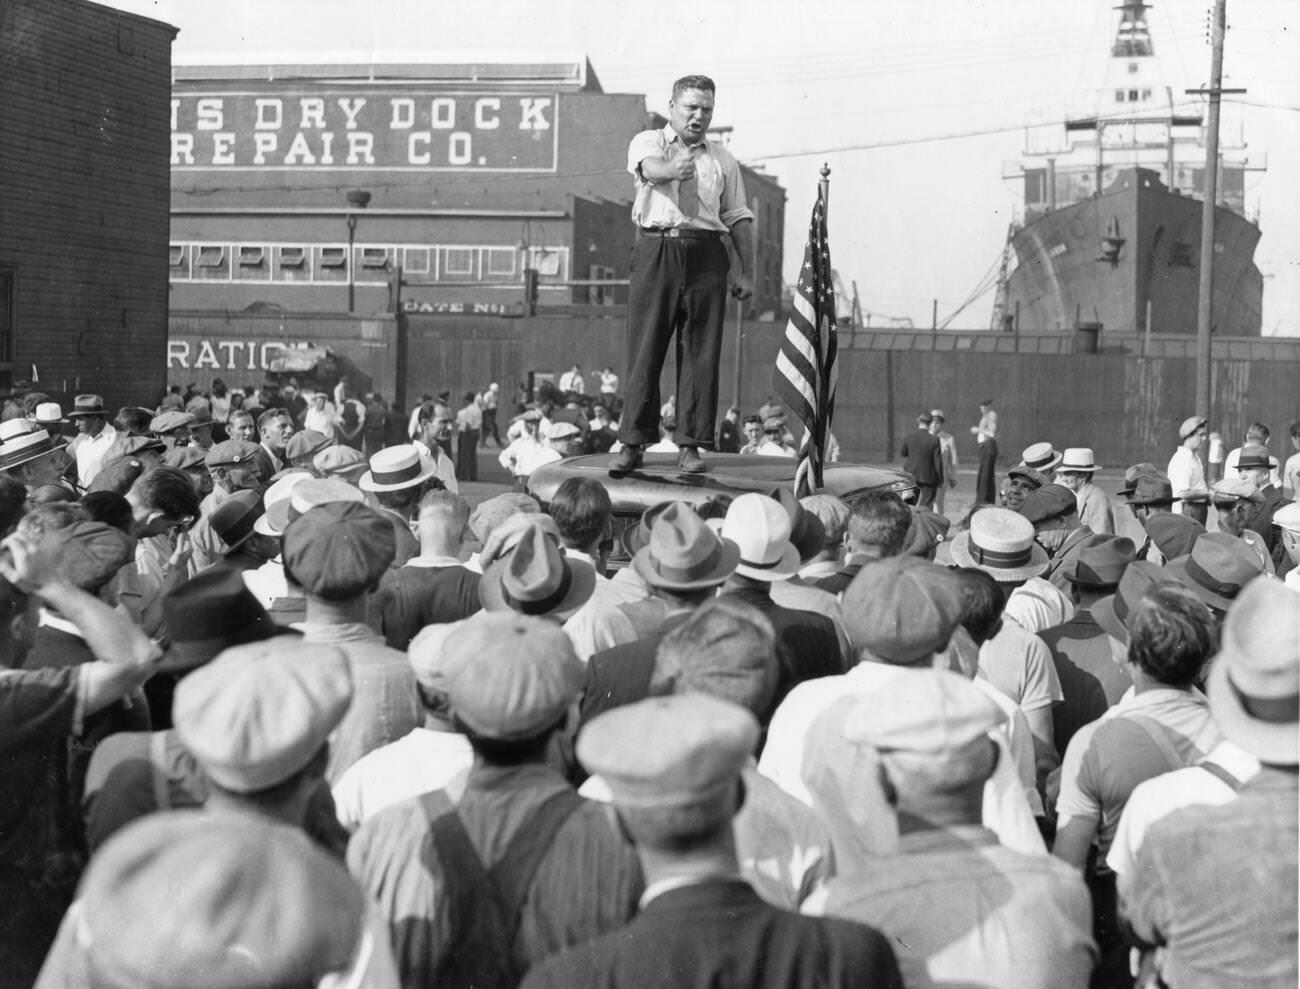 Union Organizer Urges Longshore Workers To Join Union, Brooklyn, 1930S